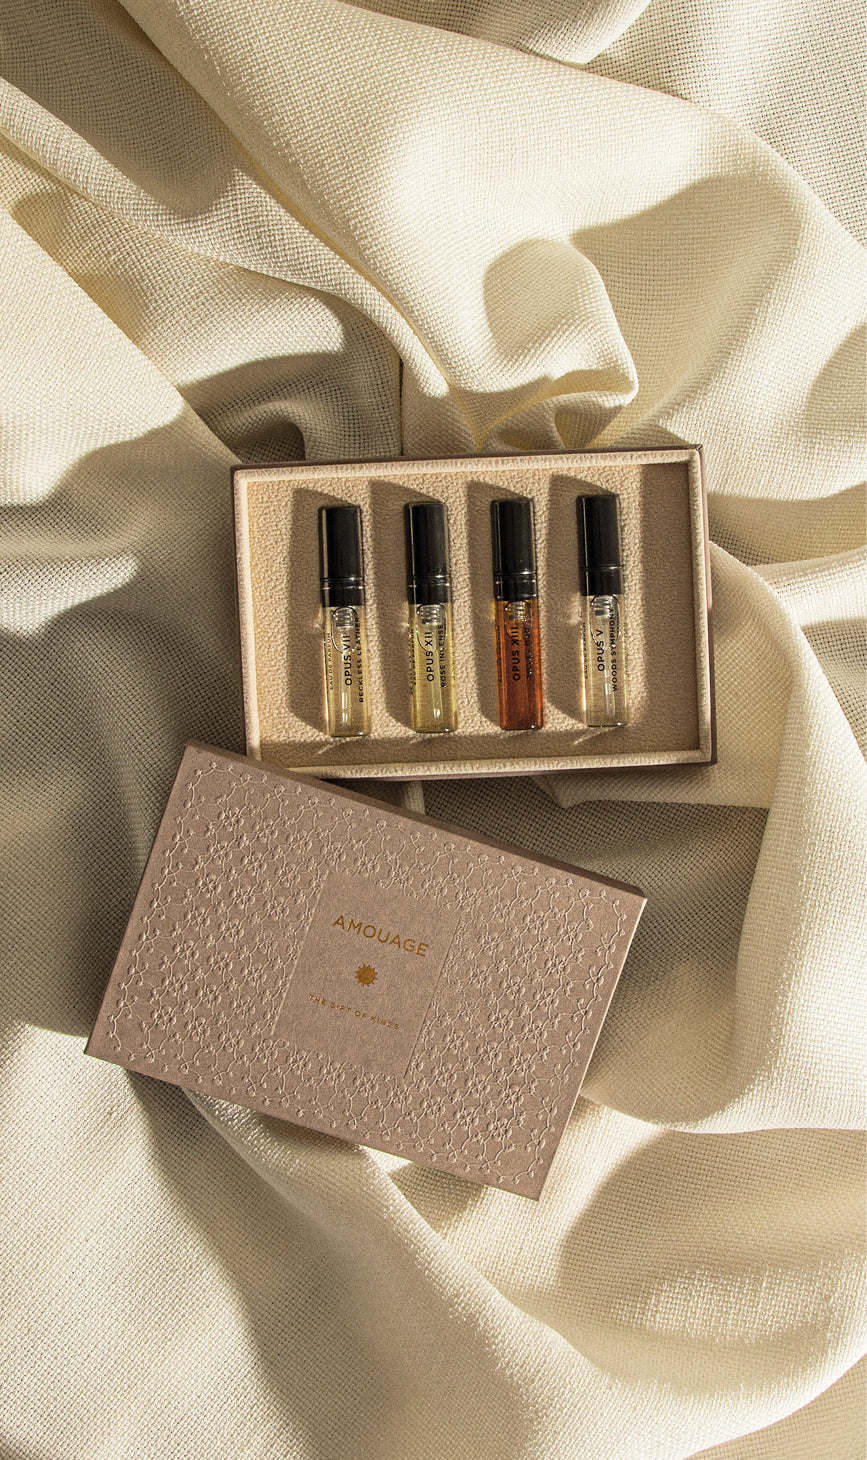 Sampler Sets – The House of Amouage